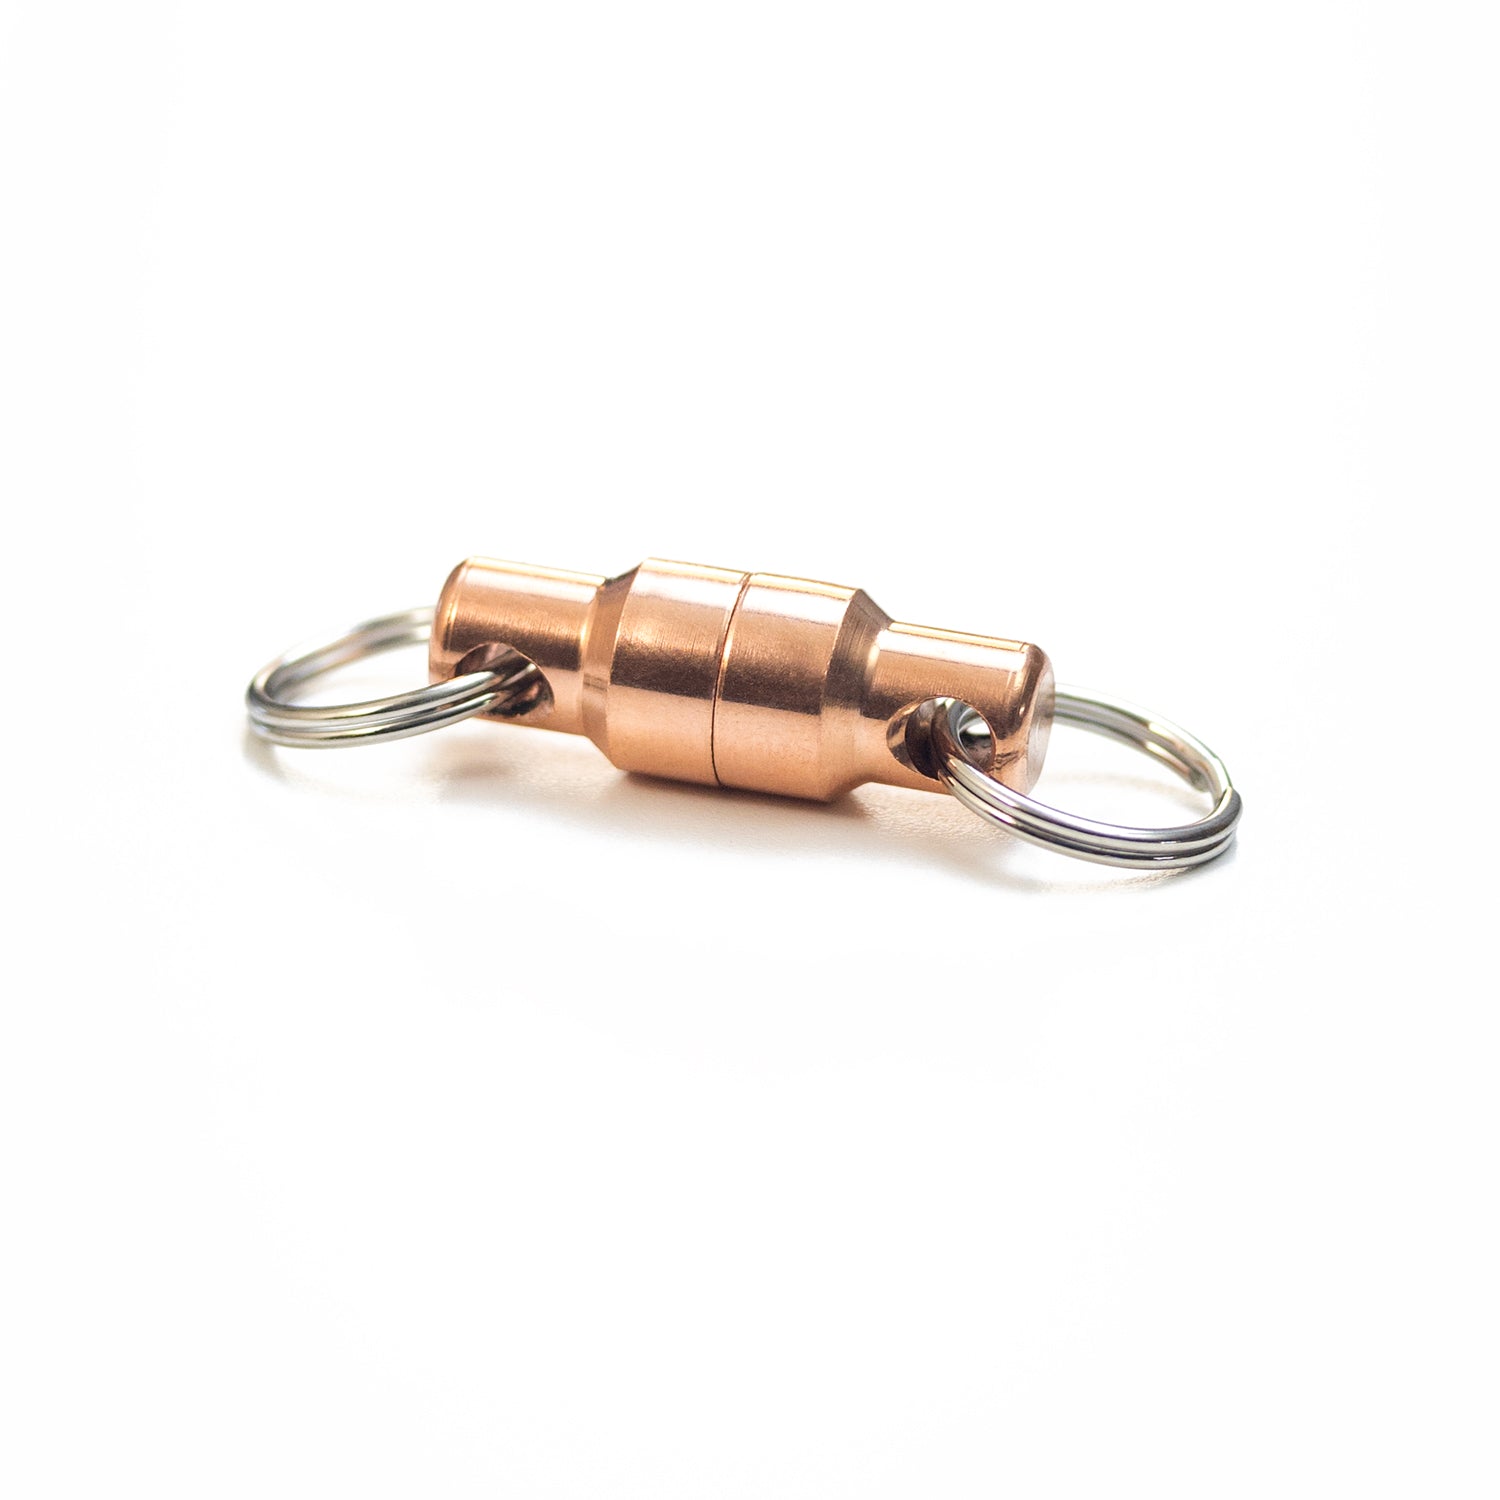 Limited Edition V3 Copper Quick Release by Urban Carvers